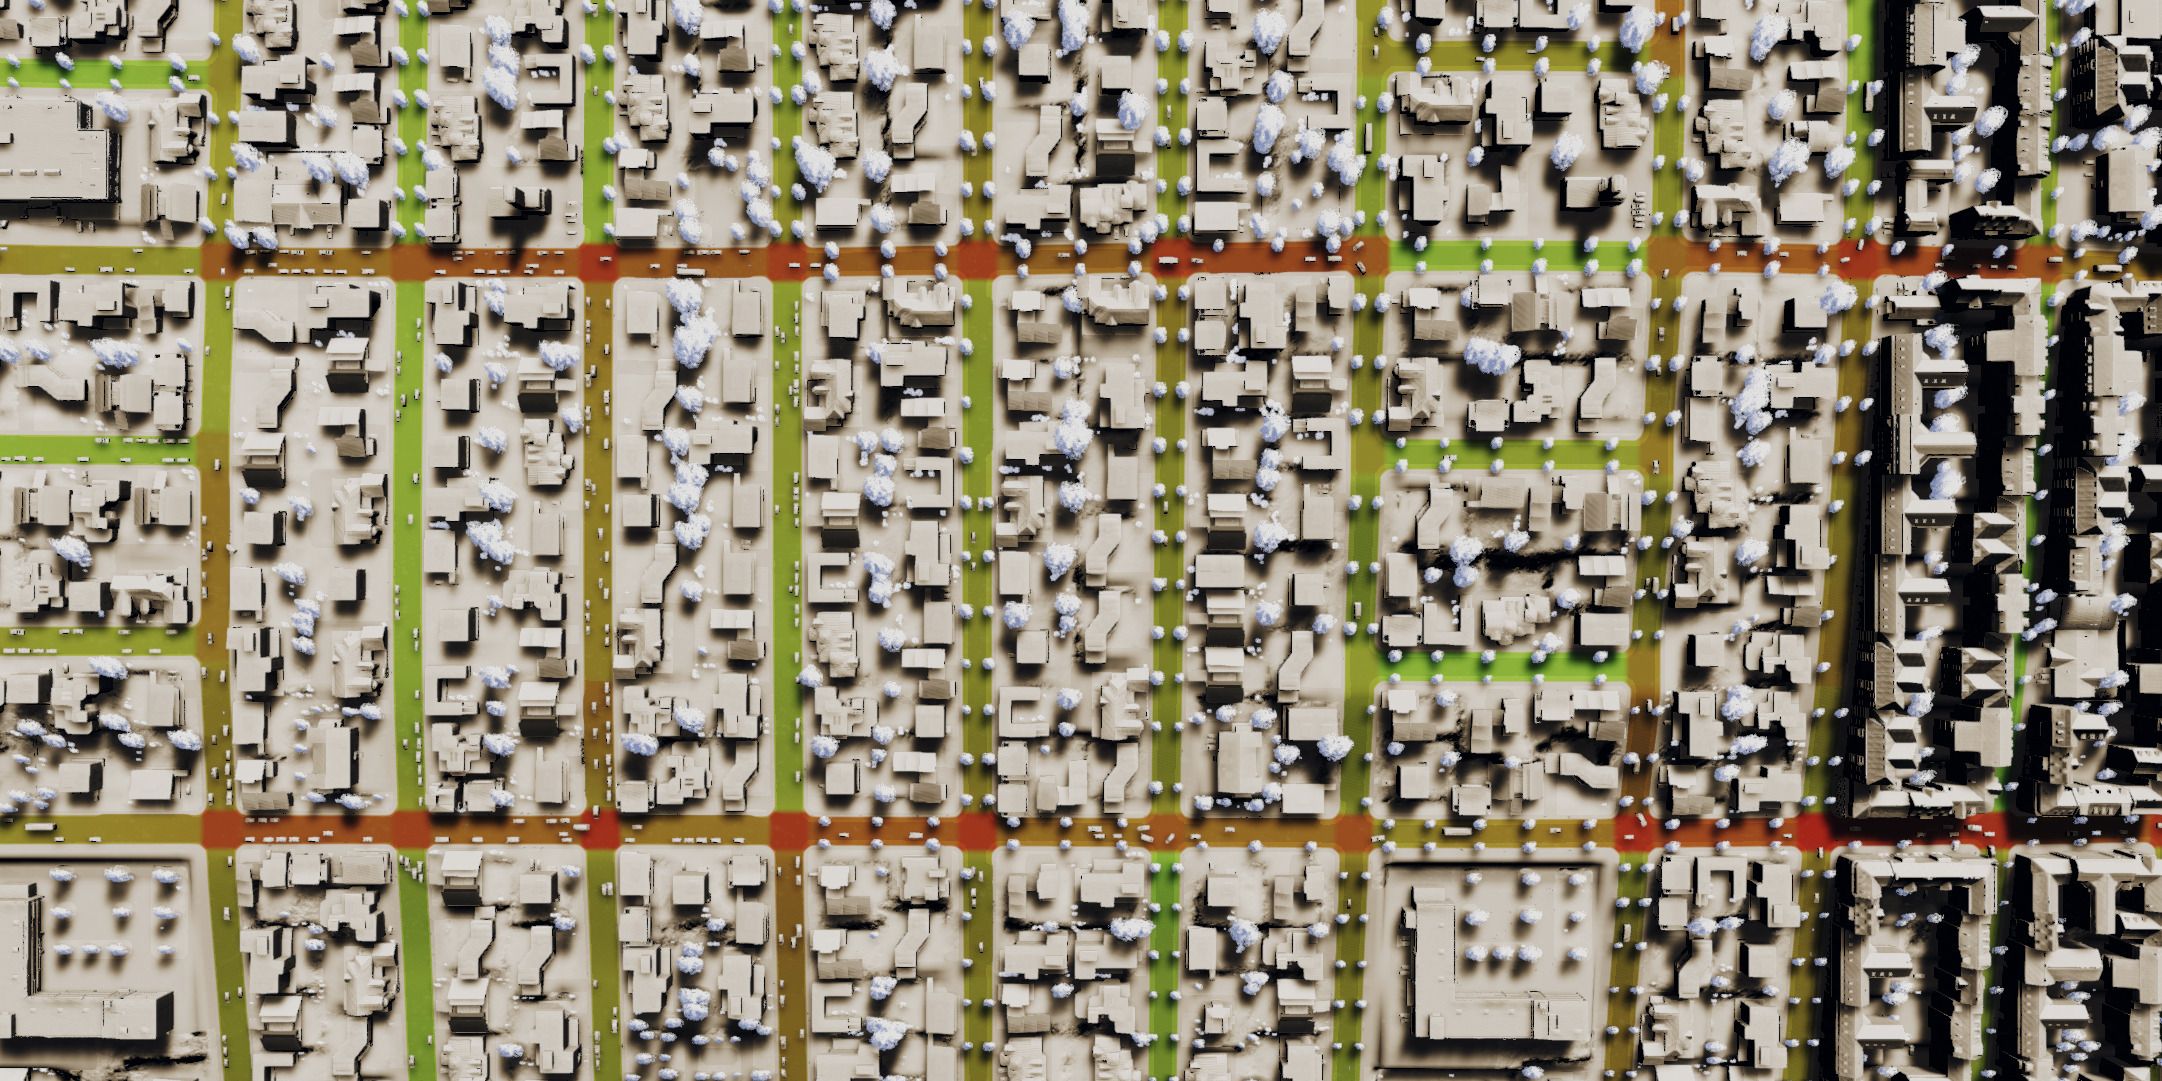 A top down view of the traffic in Cities: Skylines